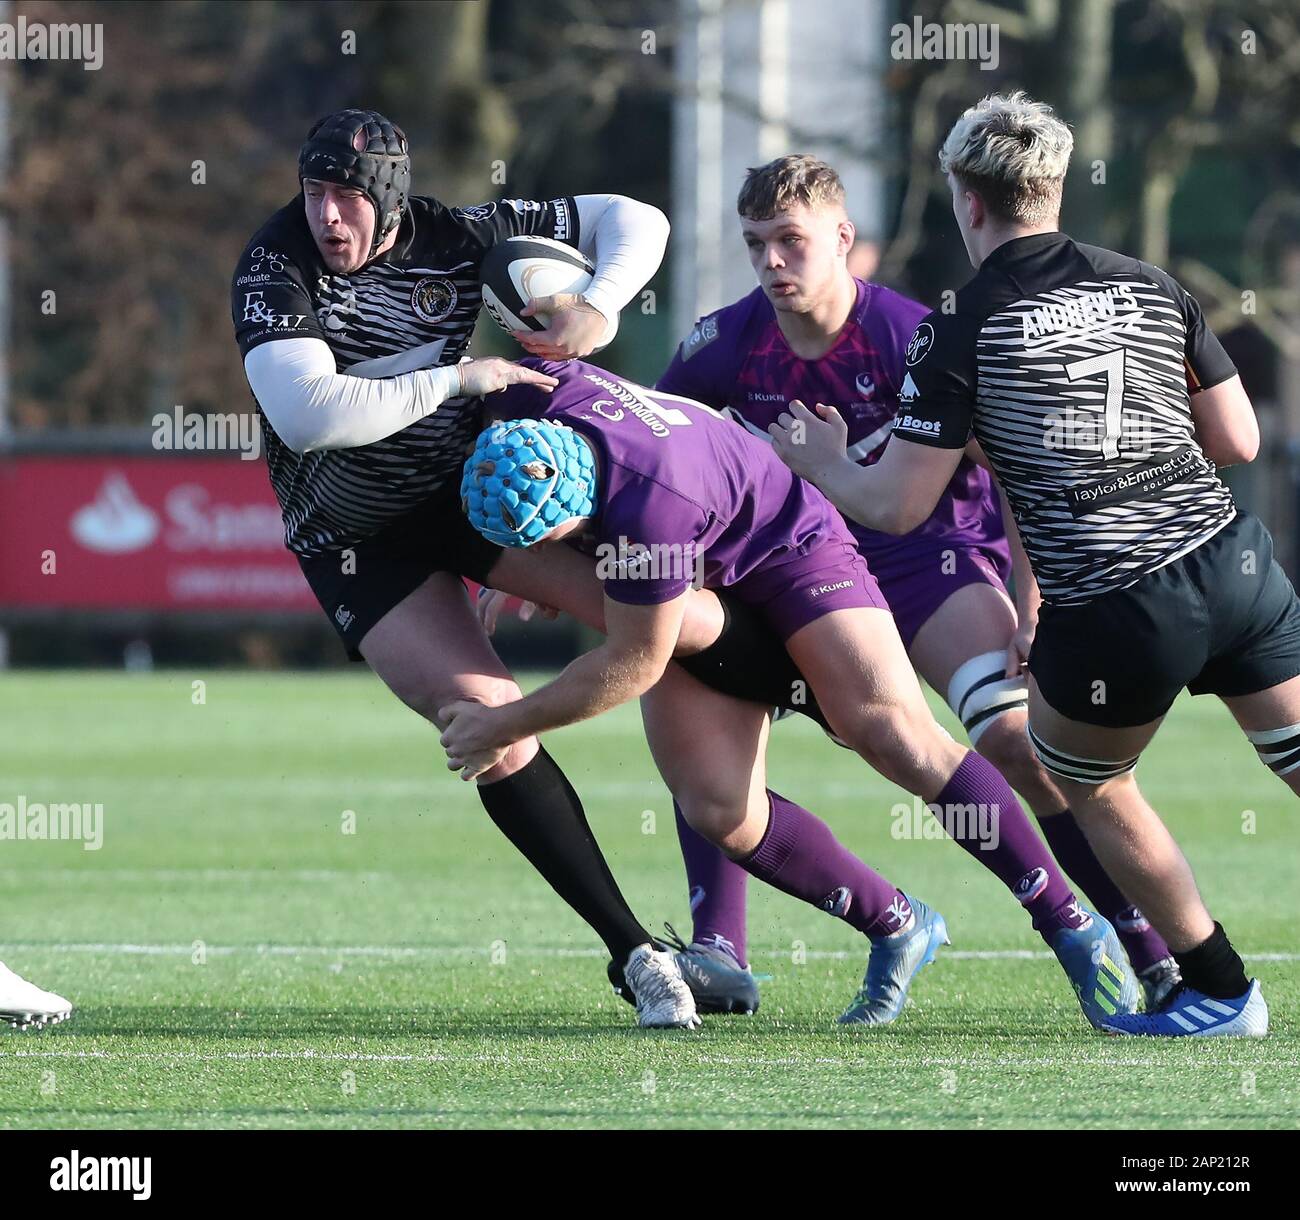 18.01.2020. Loughborough, England.   Luke Crofts of Sheffield Tigers is tackled by Austin Wallis of Loughborough Students during the RFU National 2 North rugby union fixture between Loughborough Students and Sheffield Tigers RFC.  Phil Hutchinson/Alamy Live News Stock Photo